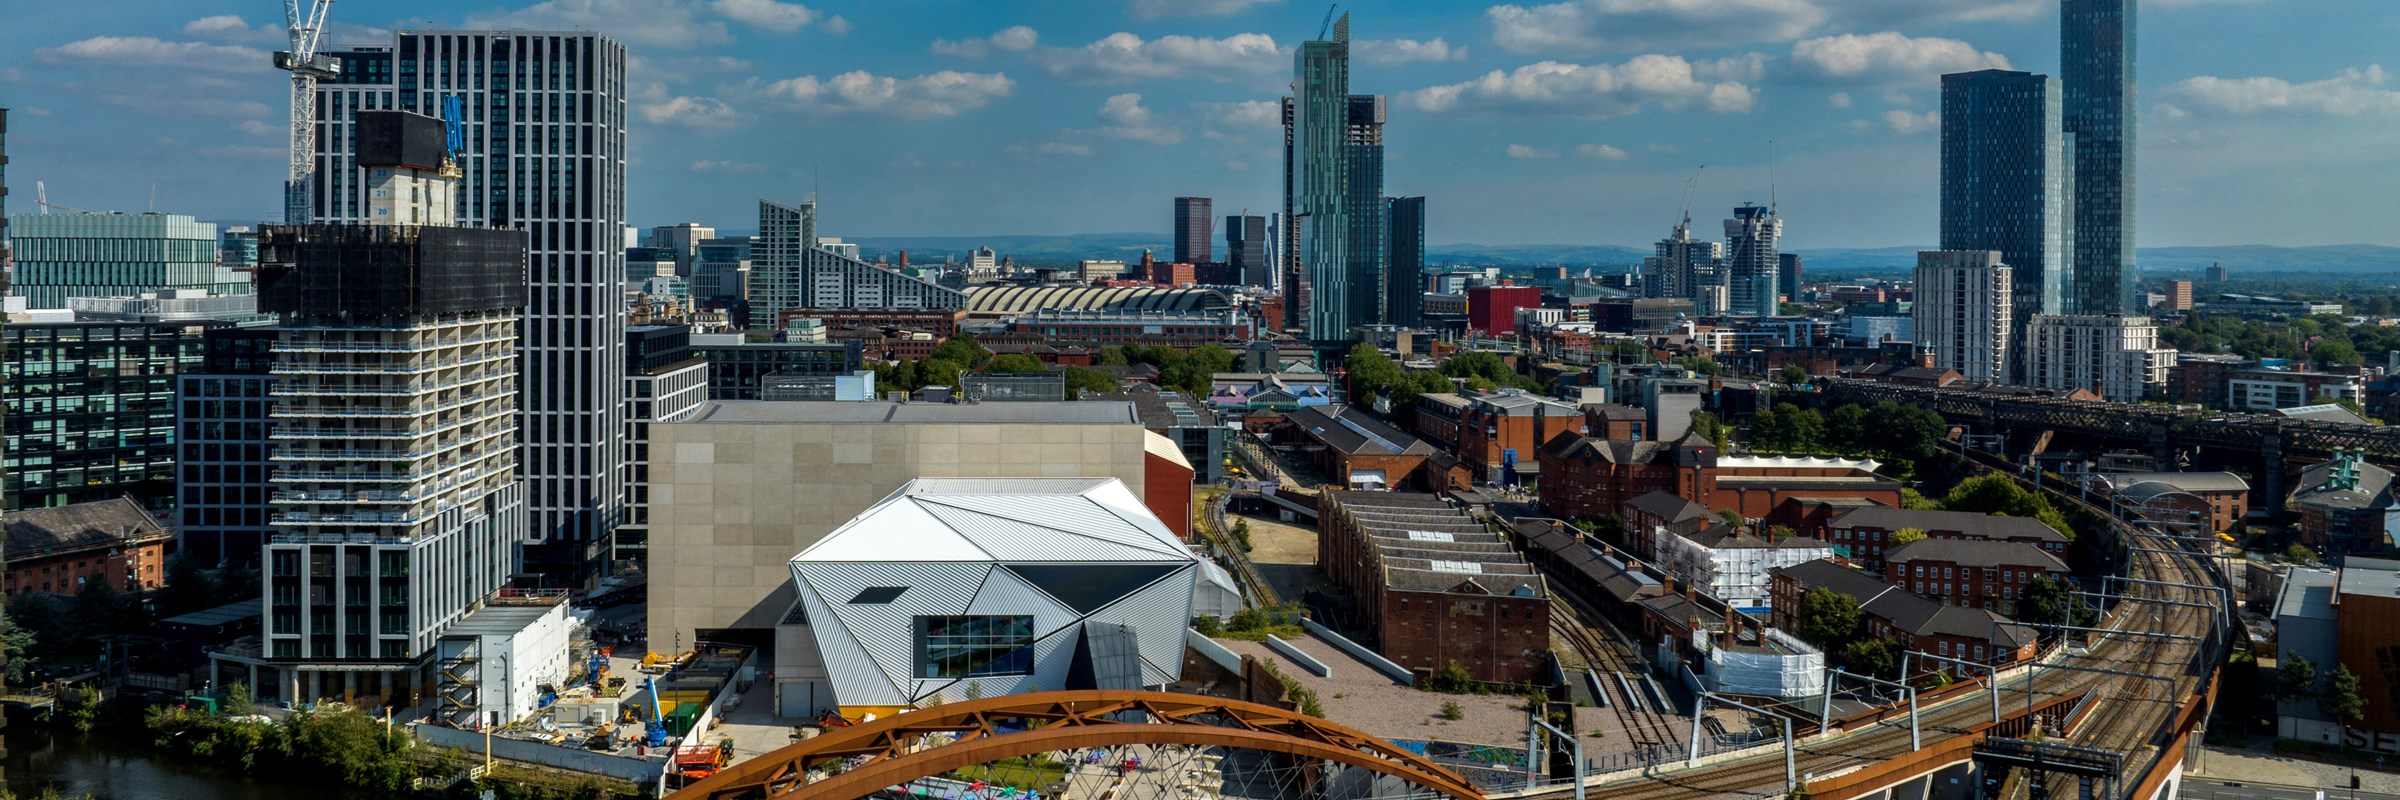 Birds eye view of the city of Greater Manchester.